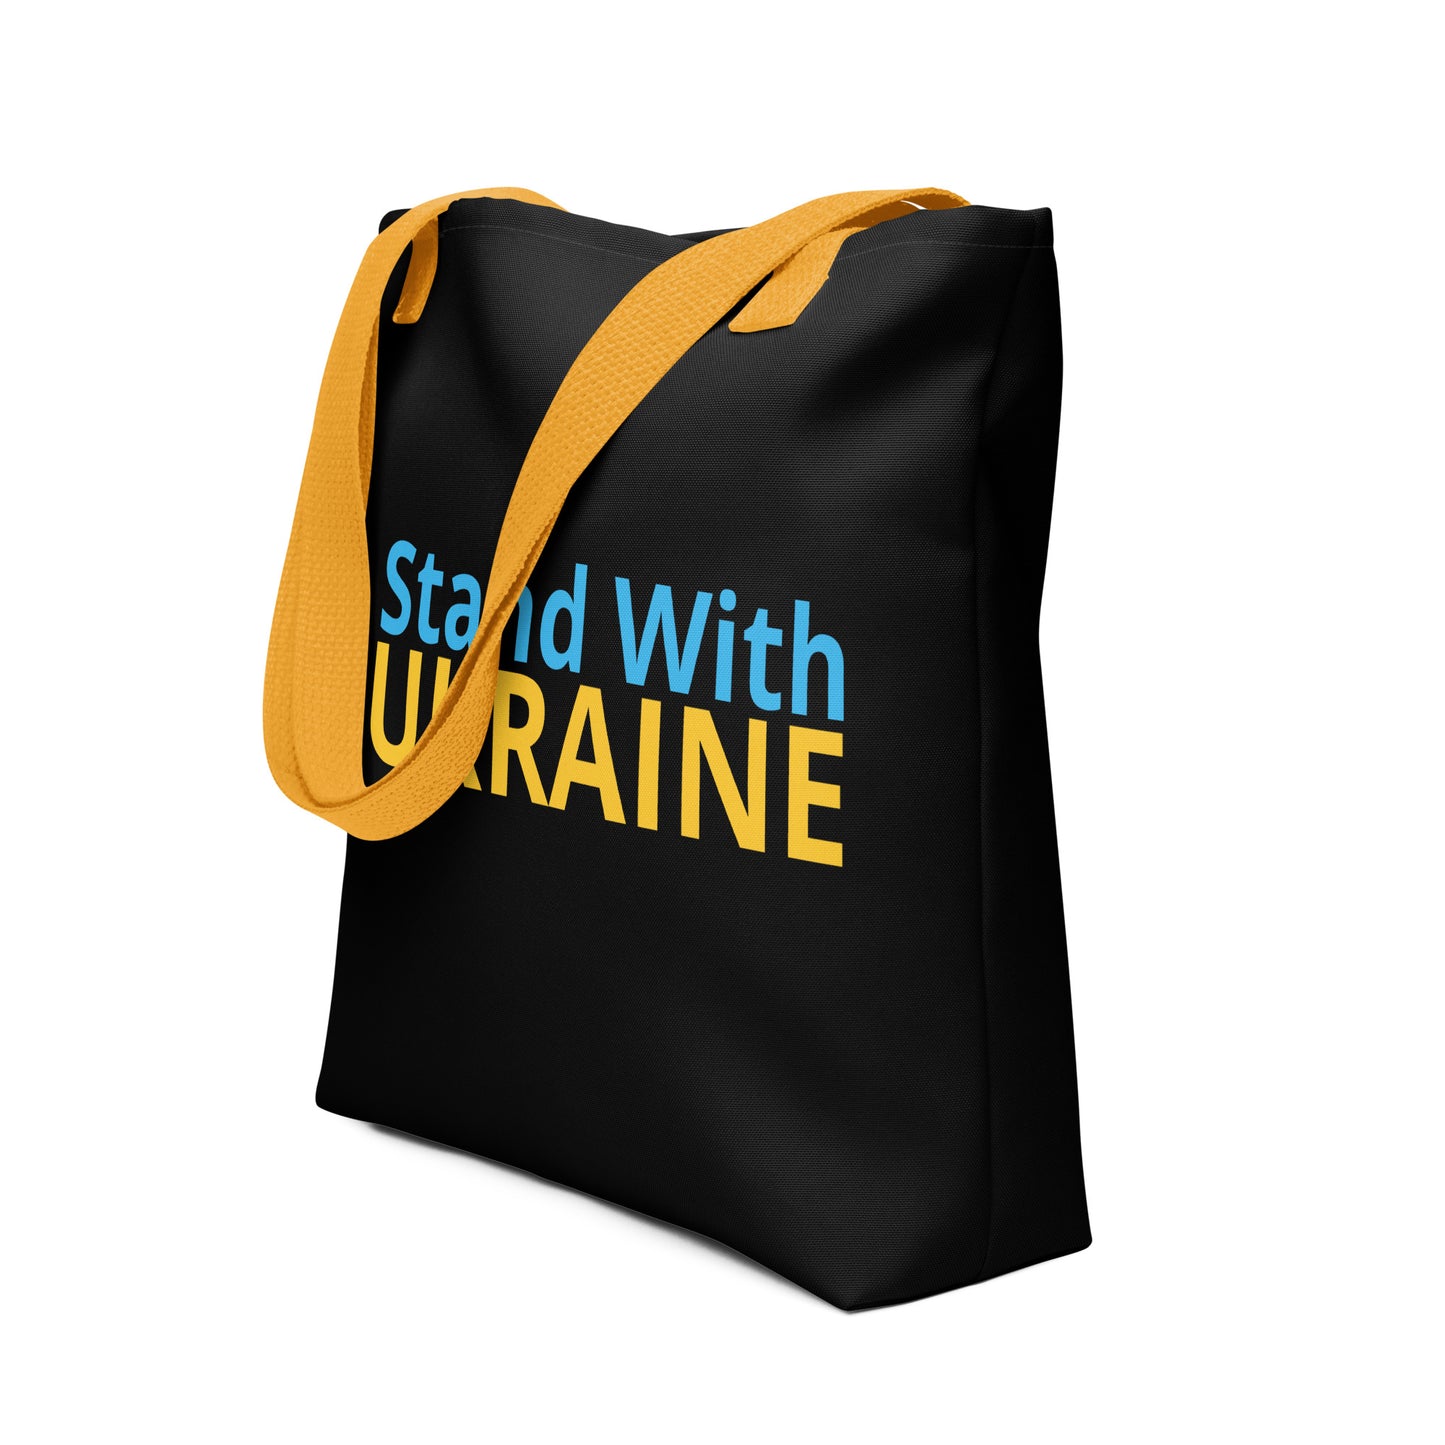 Stand With Ukraine Tote Bag